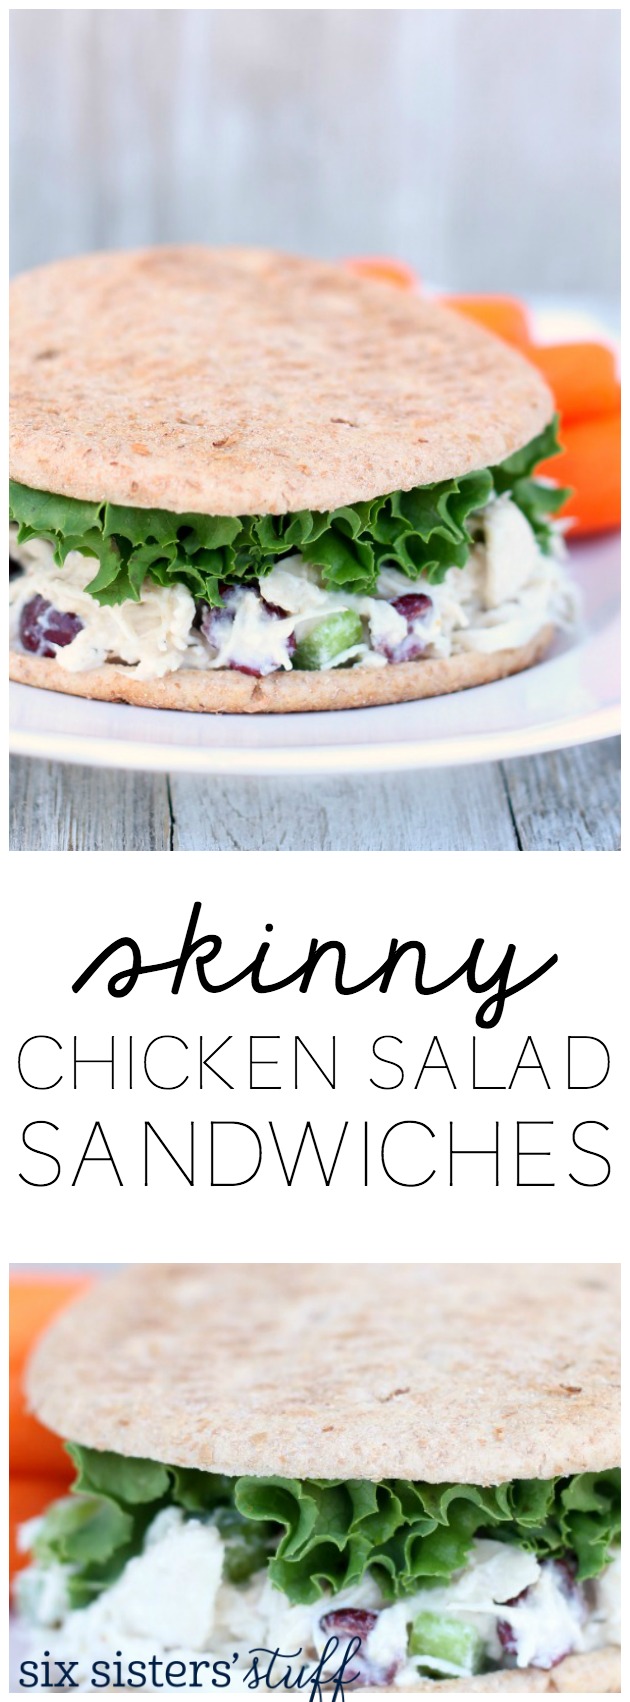 These Skinny Chicken Salad Sandwiches are loaded with veggies and protein! SixSistersStuff.com